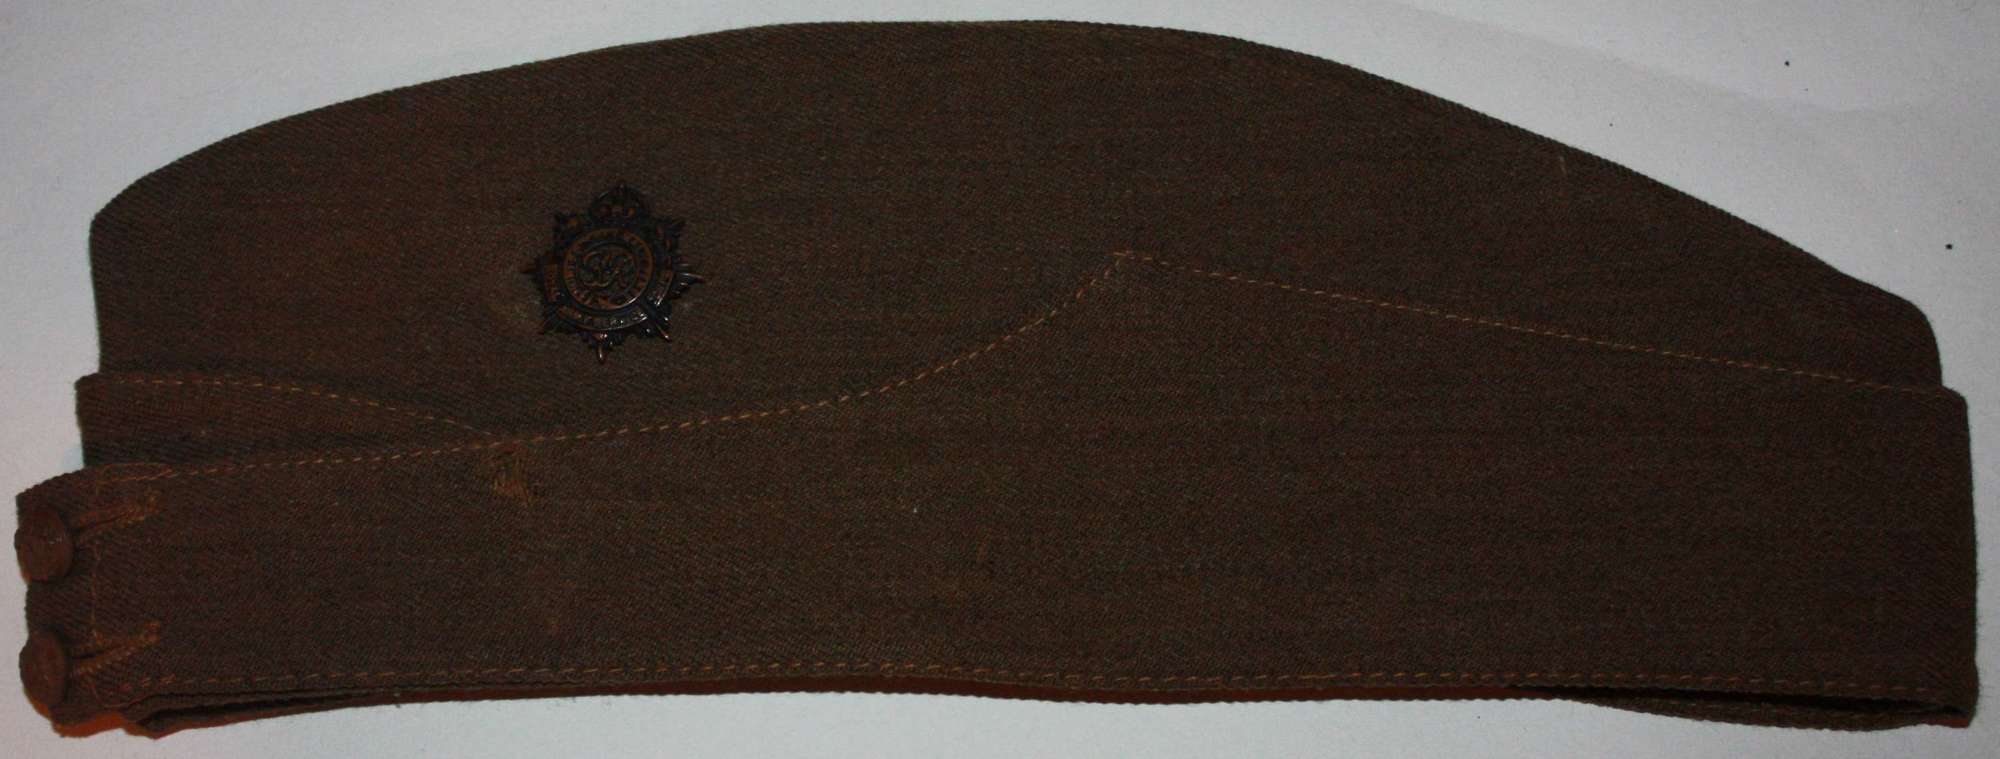 A GOOD 1942 DATED BRITISH  RASC SIDE CAP NAMED EXAMPLE